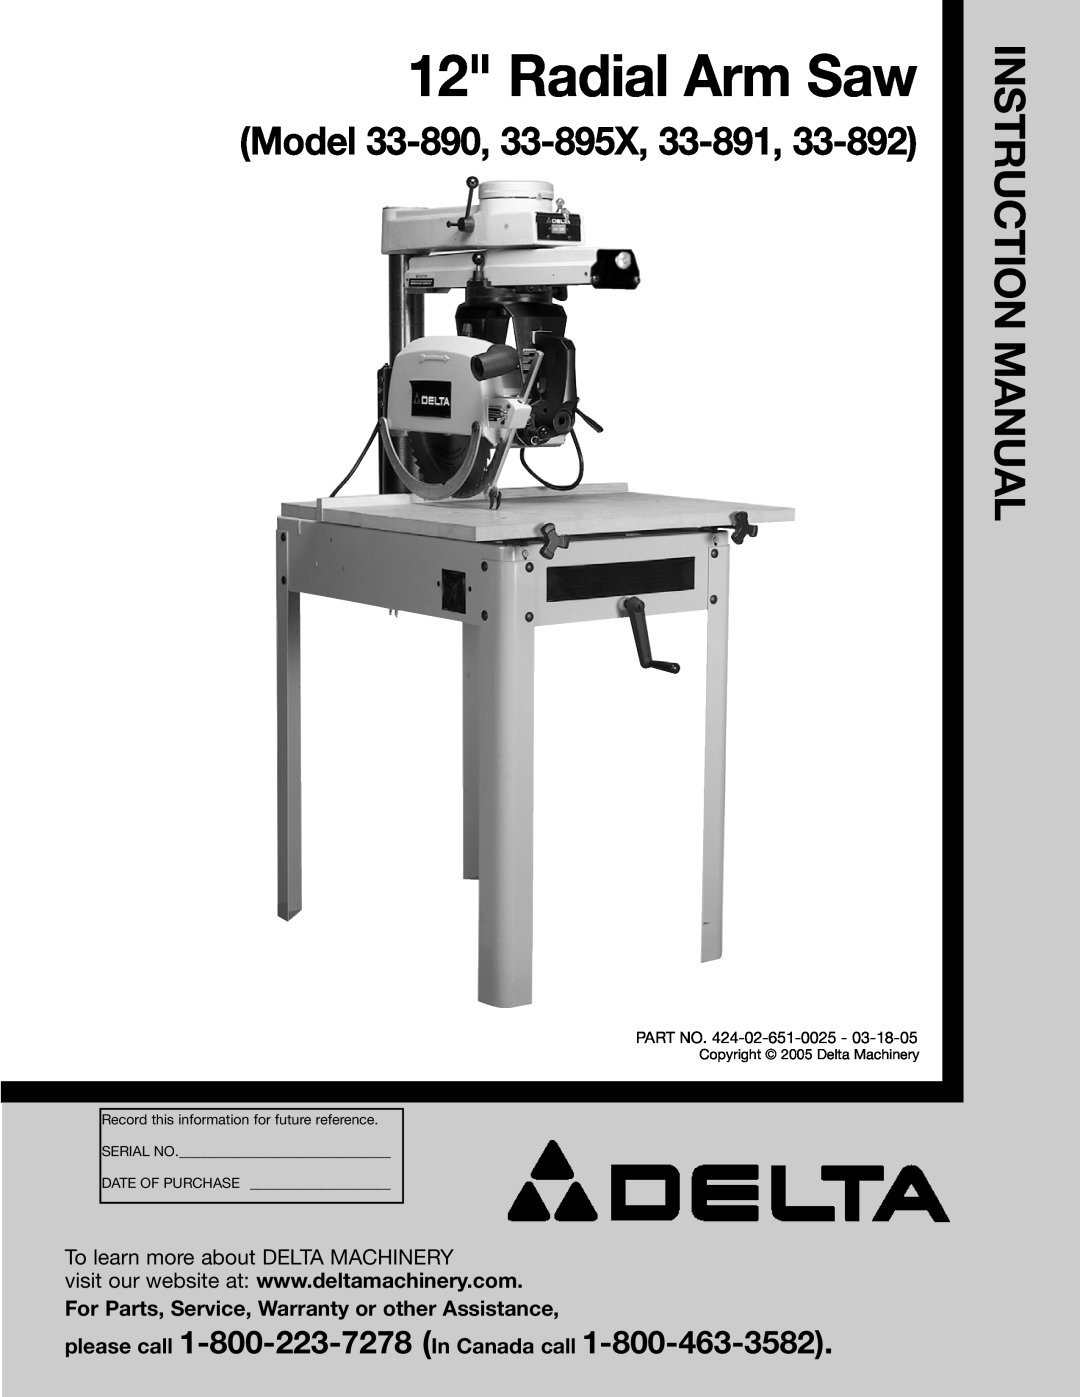 Porter-Cable 33-890 instruction manual please call 1-800-223-7278 In Canada call, Radial Arm Saw, Instruction Manual 